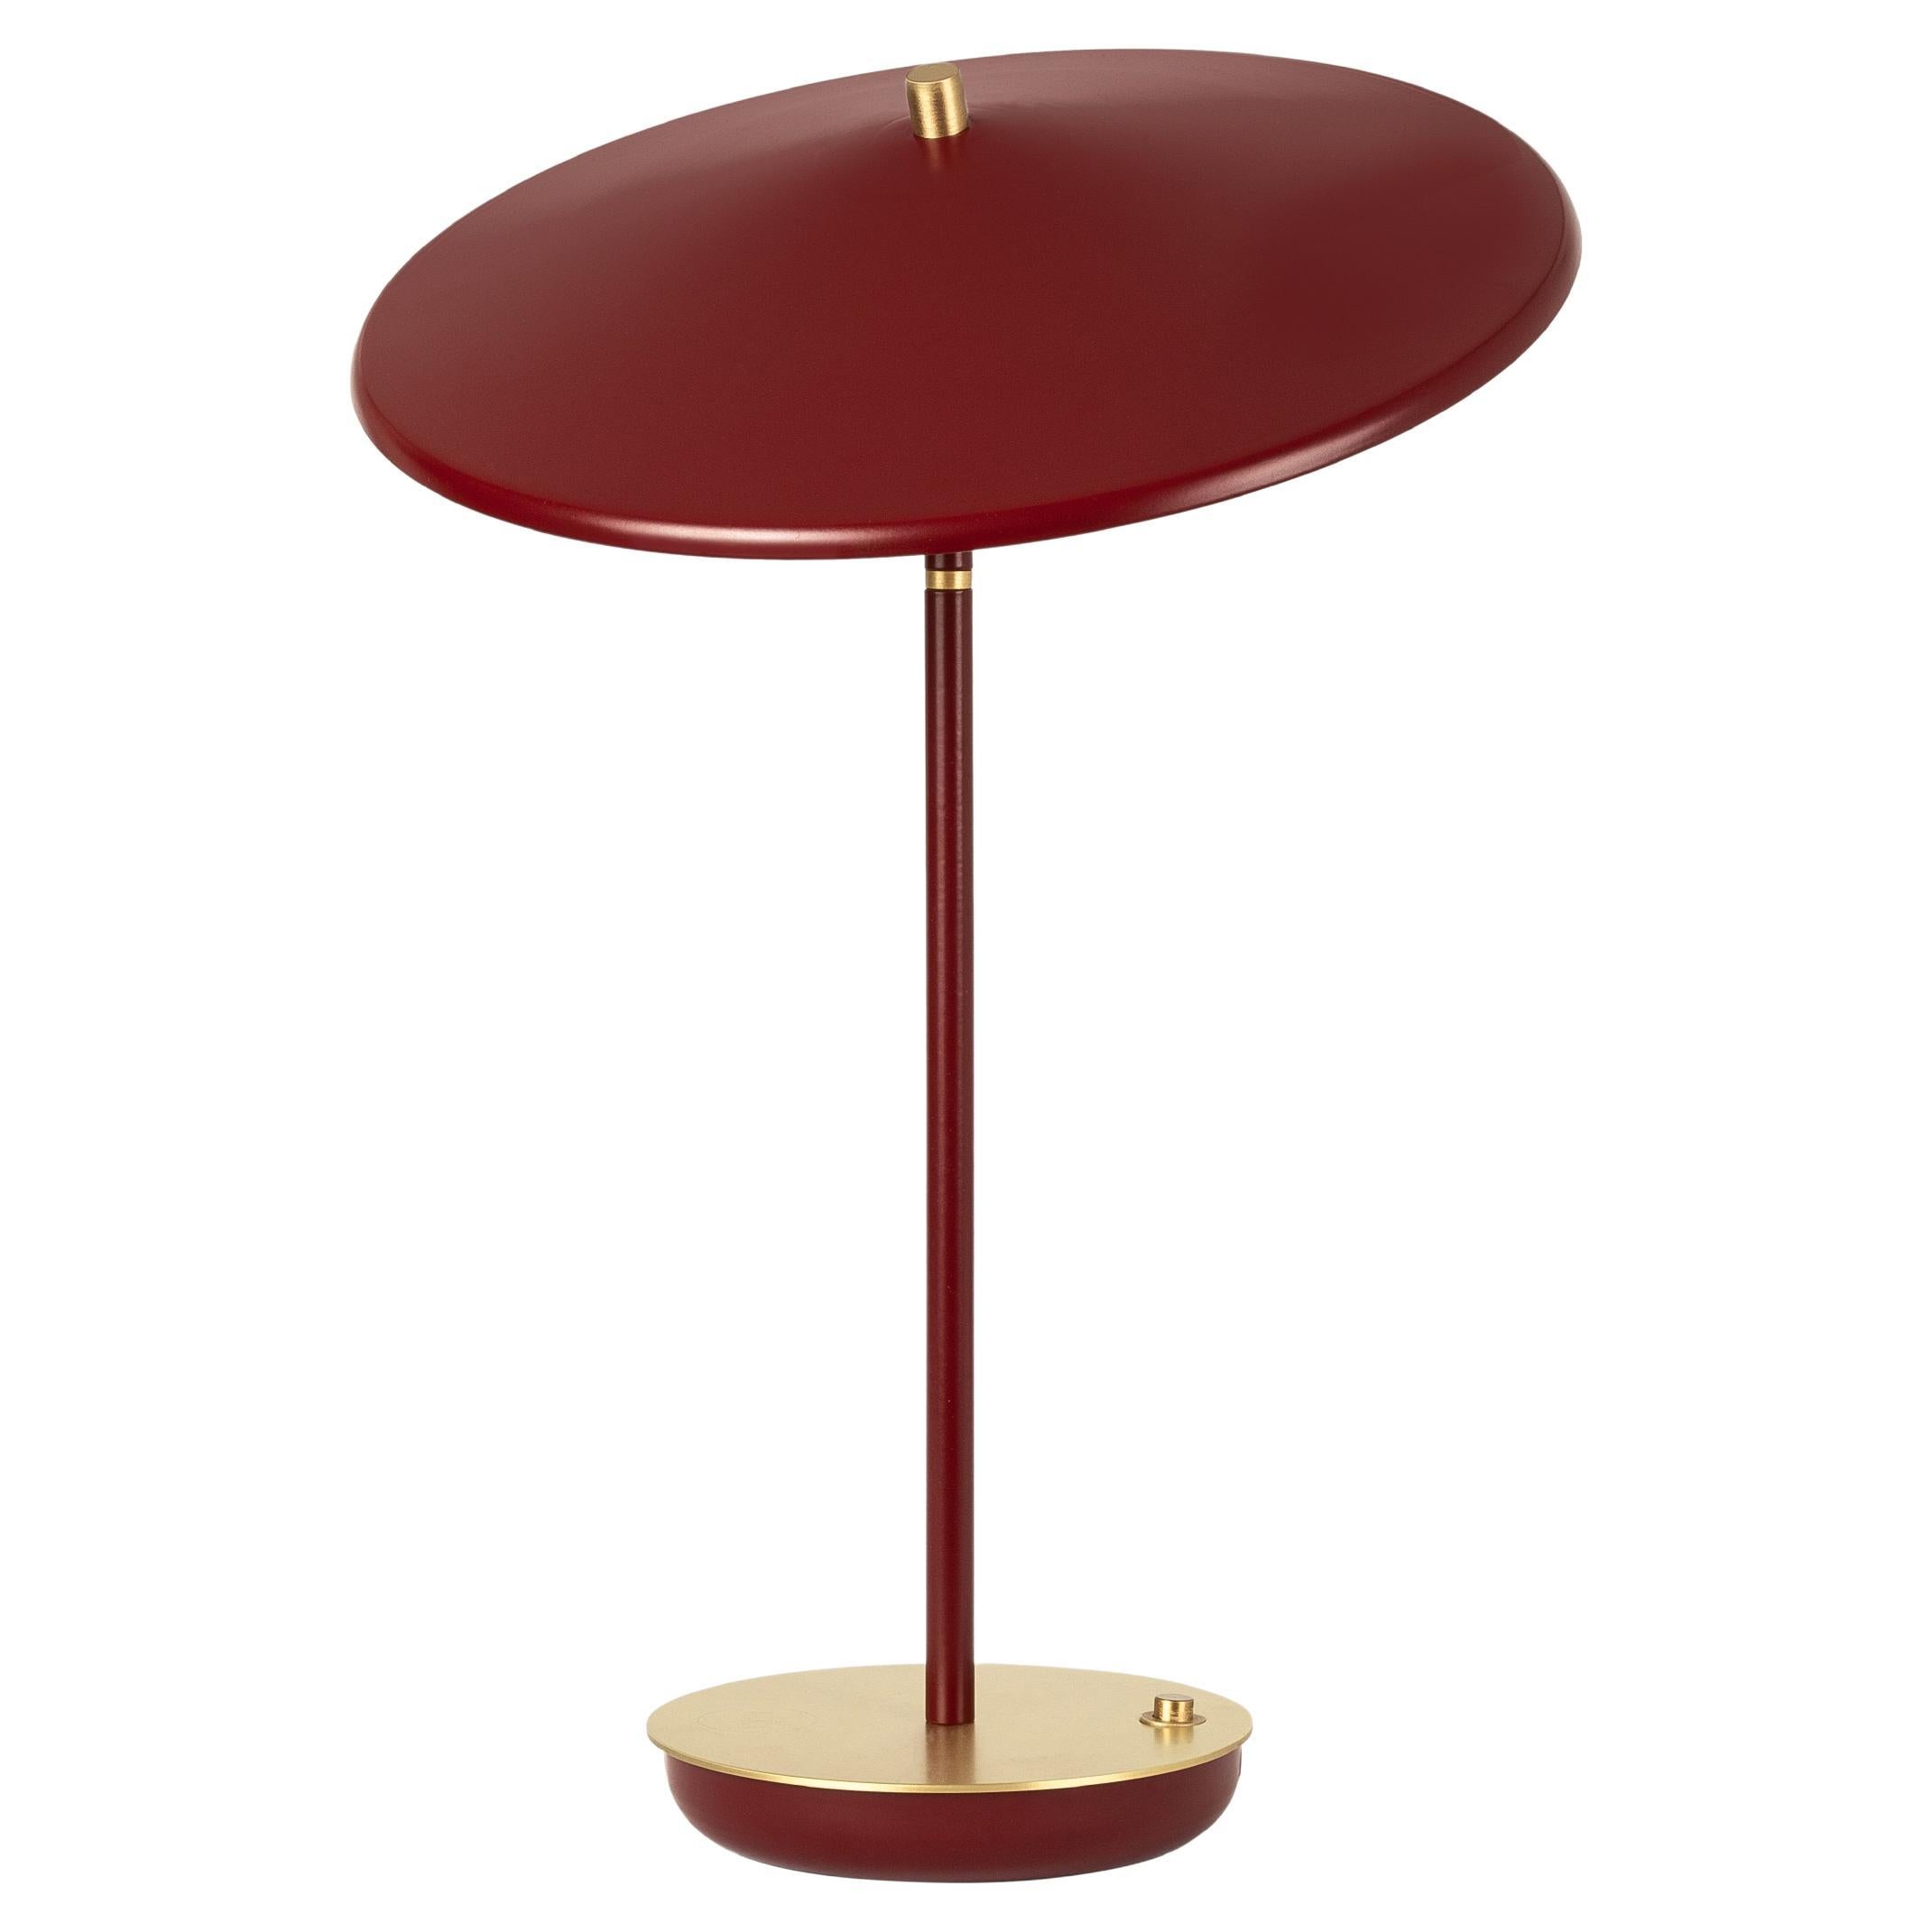 Artist Table Lamp, Maroon Color, Salone Satellite Exhibition Product